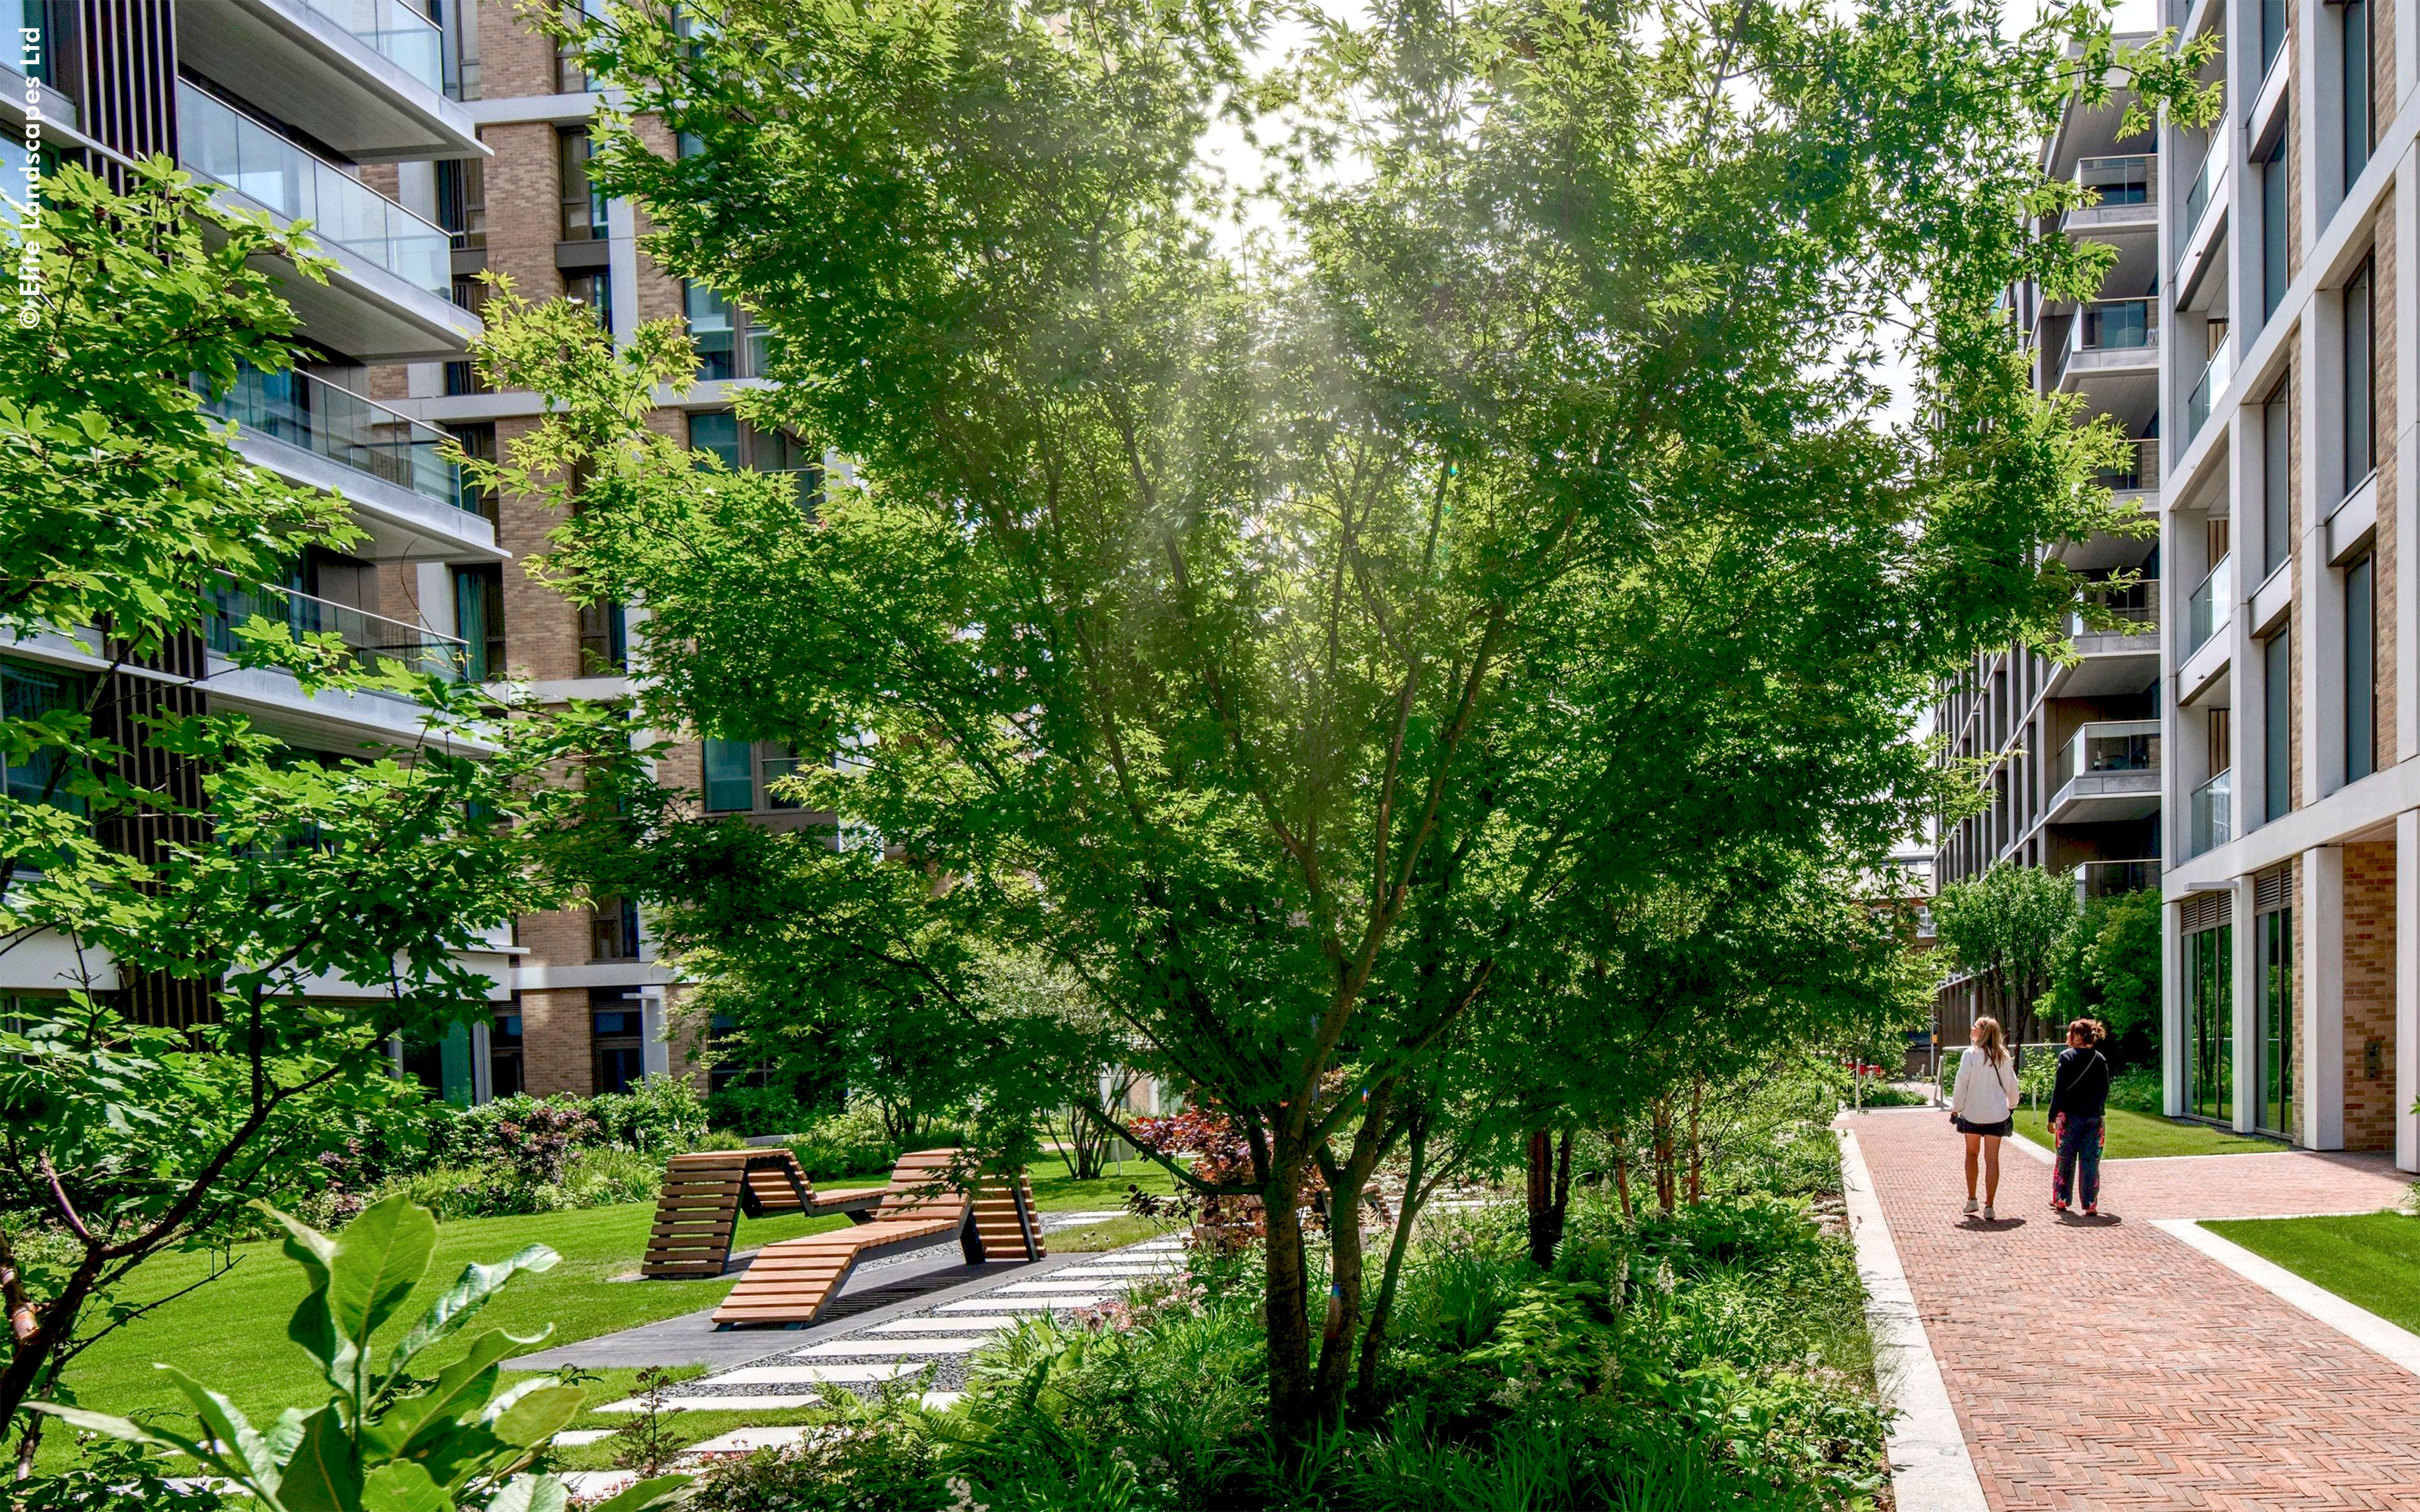 People stroll through a green courtyard of a residential complex